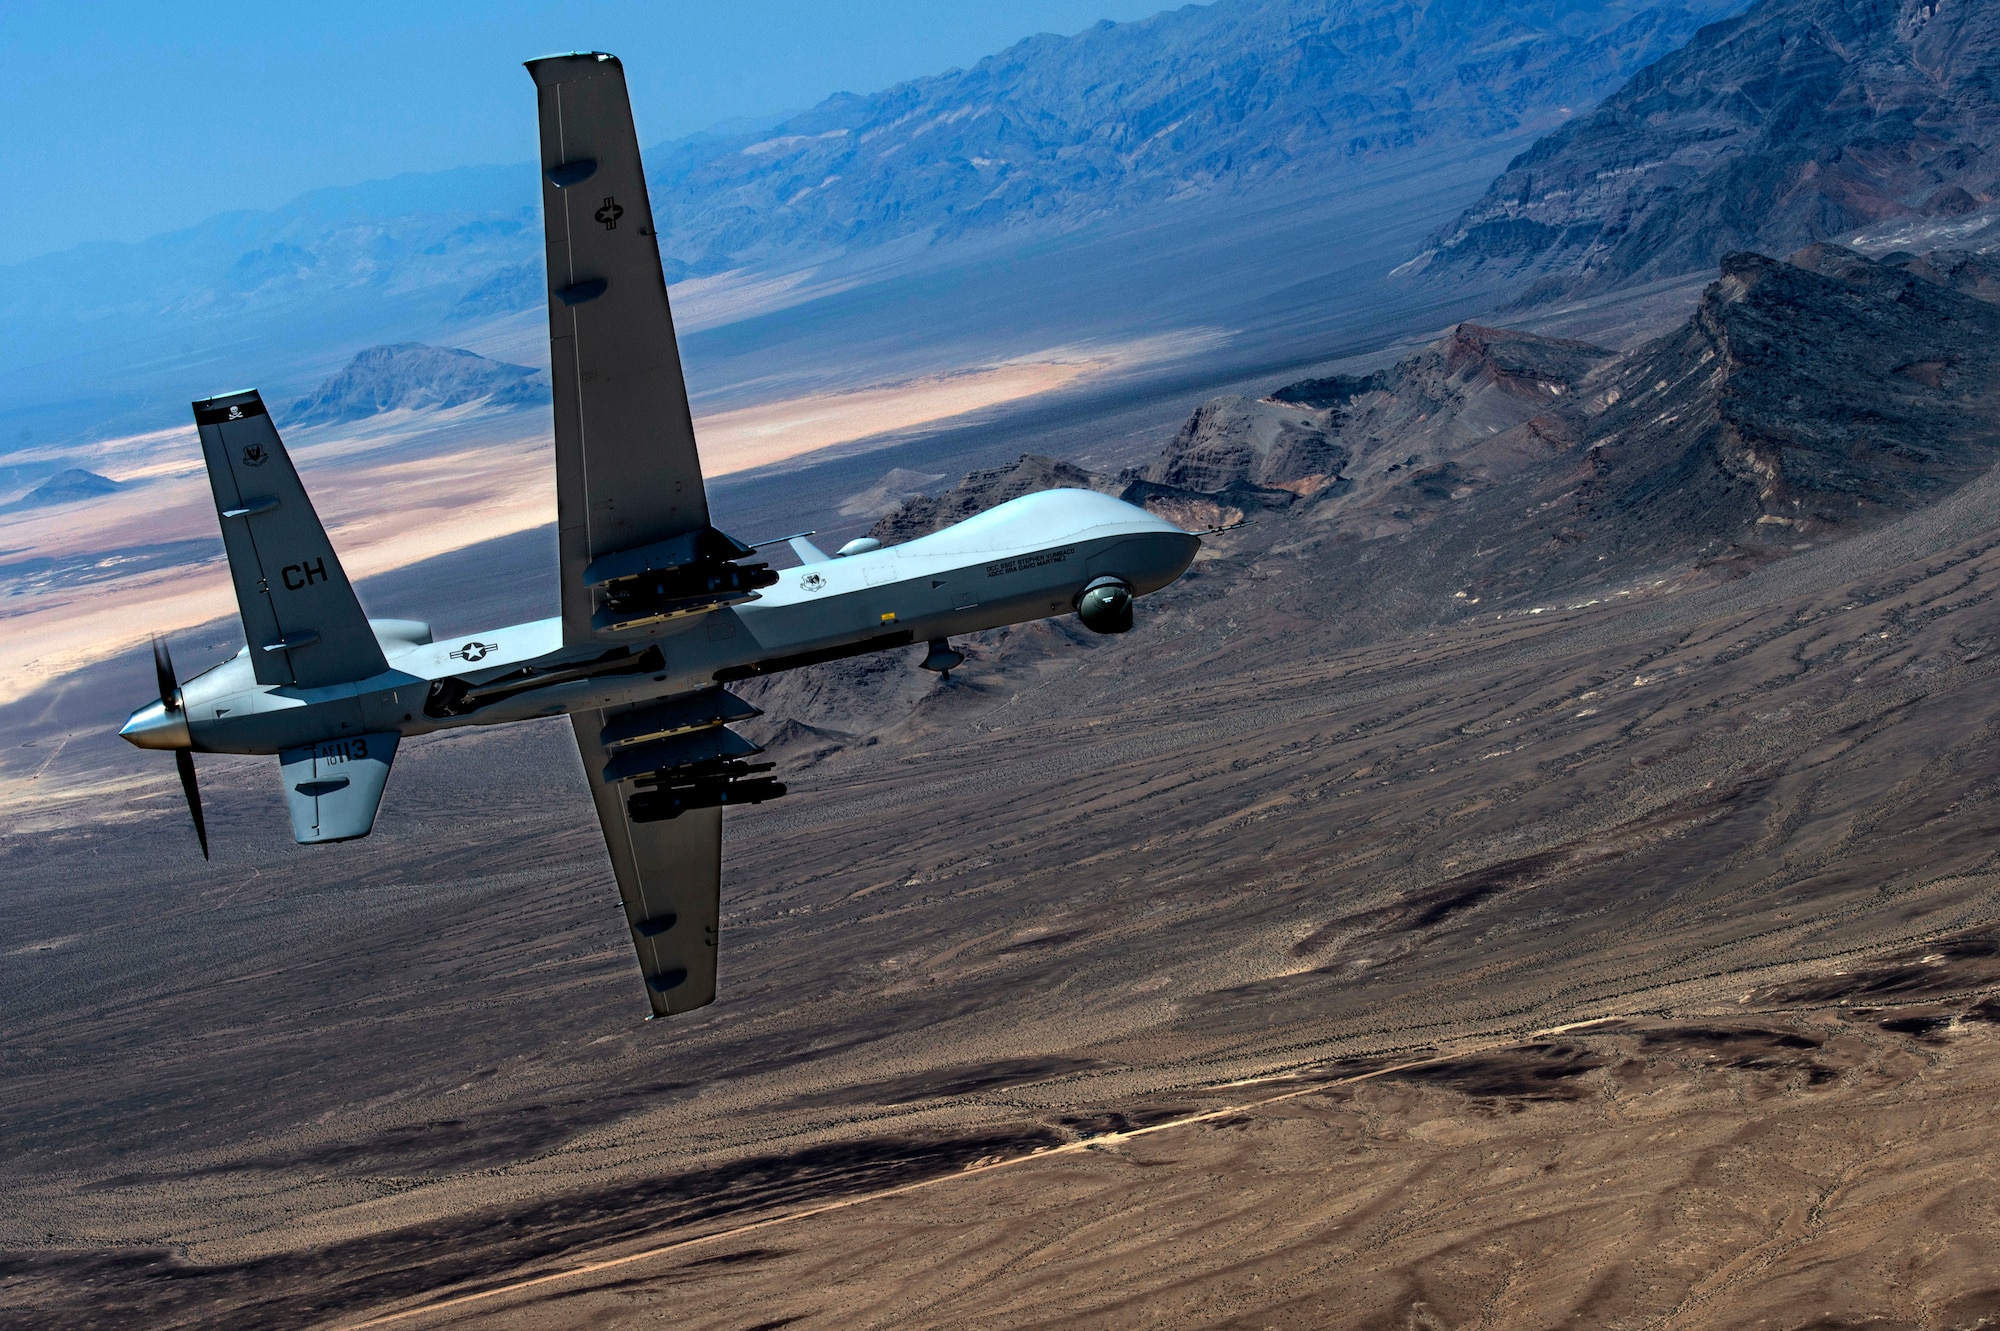 An MQ- Reaper remotely piloted aircraft performs aerial maneuvers over Creech Air Force Base, Nev., June 25, 2015. The MQ-9 Reaper is an armed, multi-mission, medium-altitude, long-endurance remotely piloted aircraft that is employed primarily as an intelligence-collection asset and secondarily against dynamic execution targets. (U.S. Air Force photo by Senior Airman Cory D. Payne)